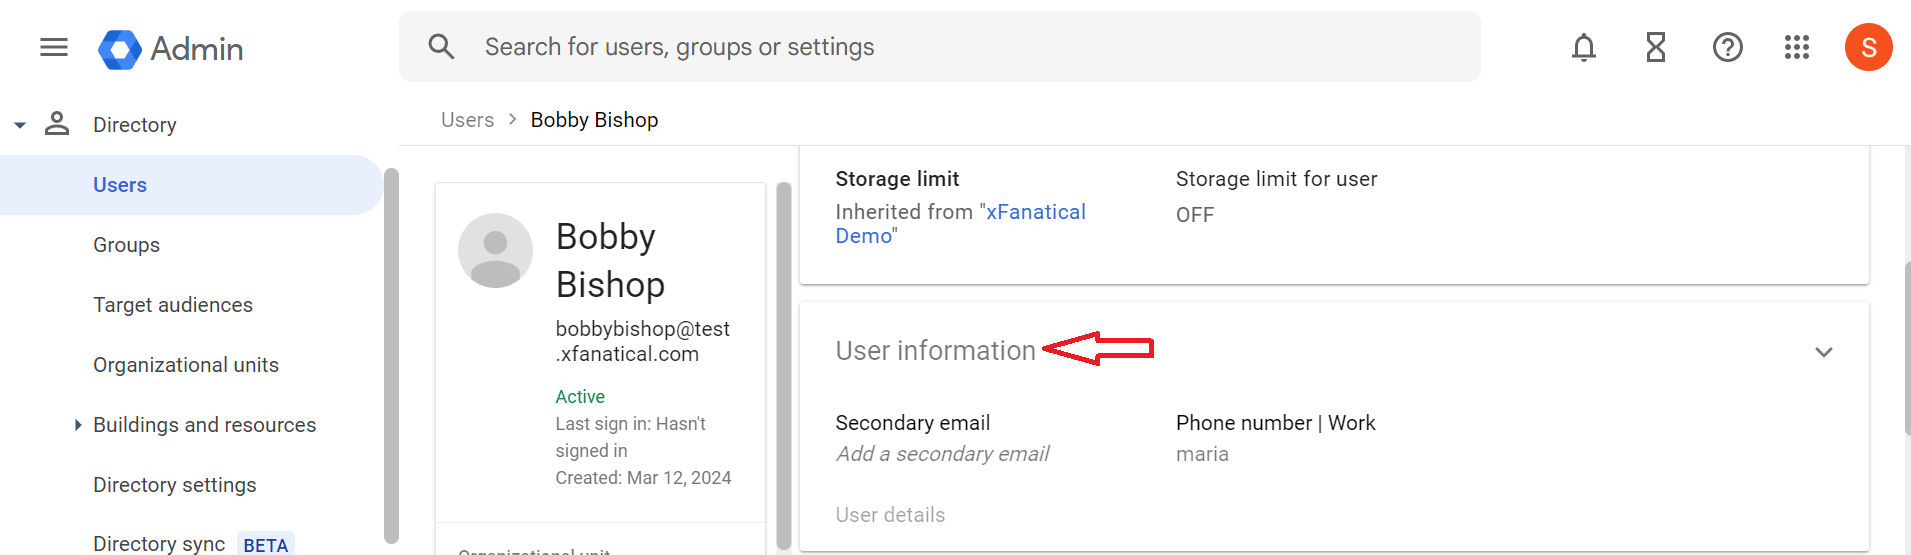 select User information